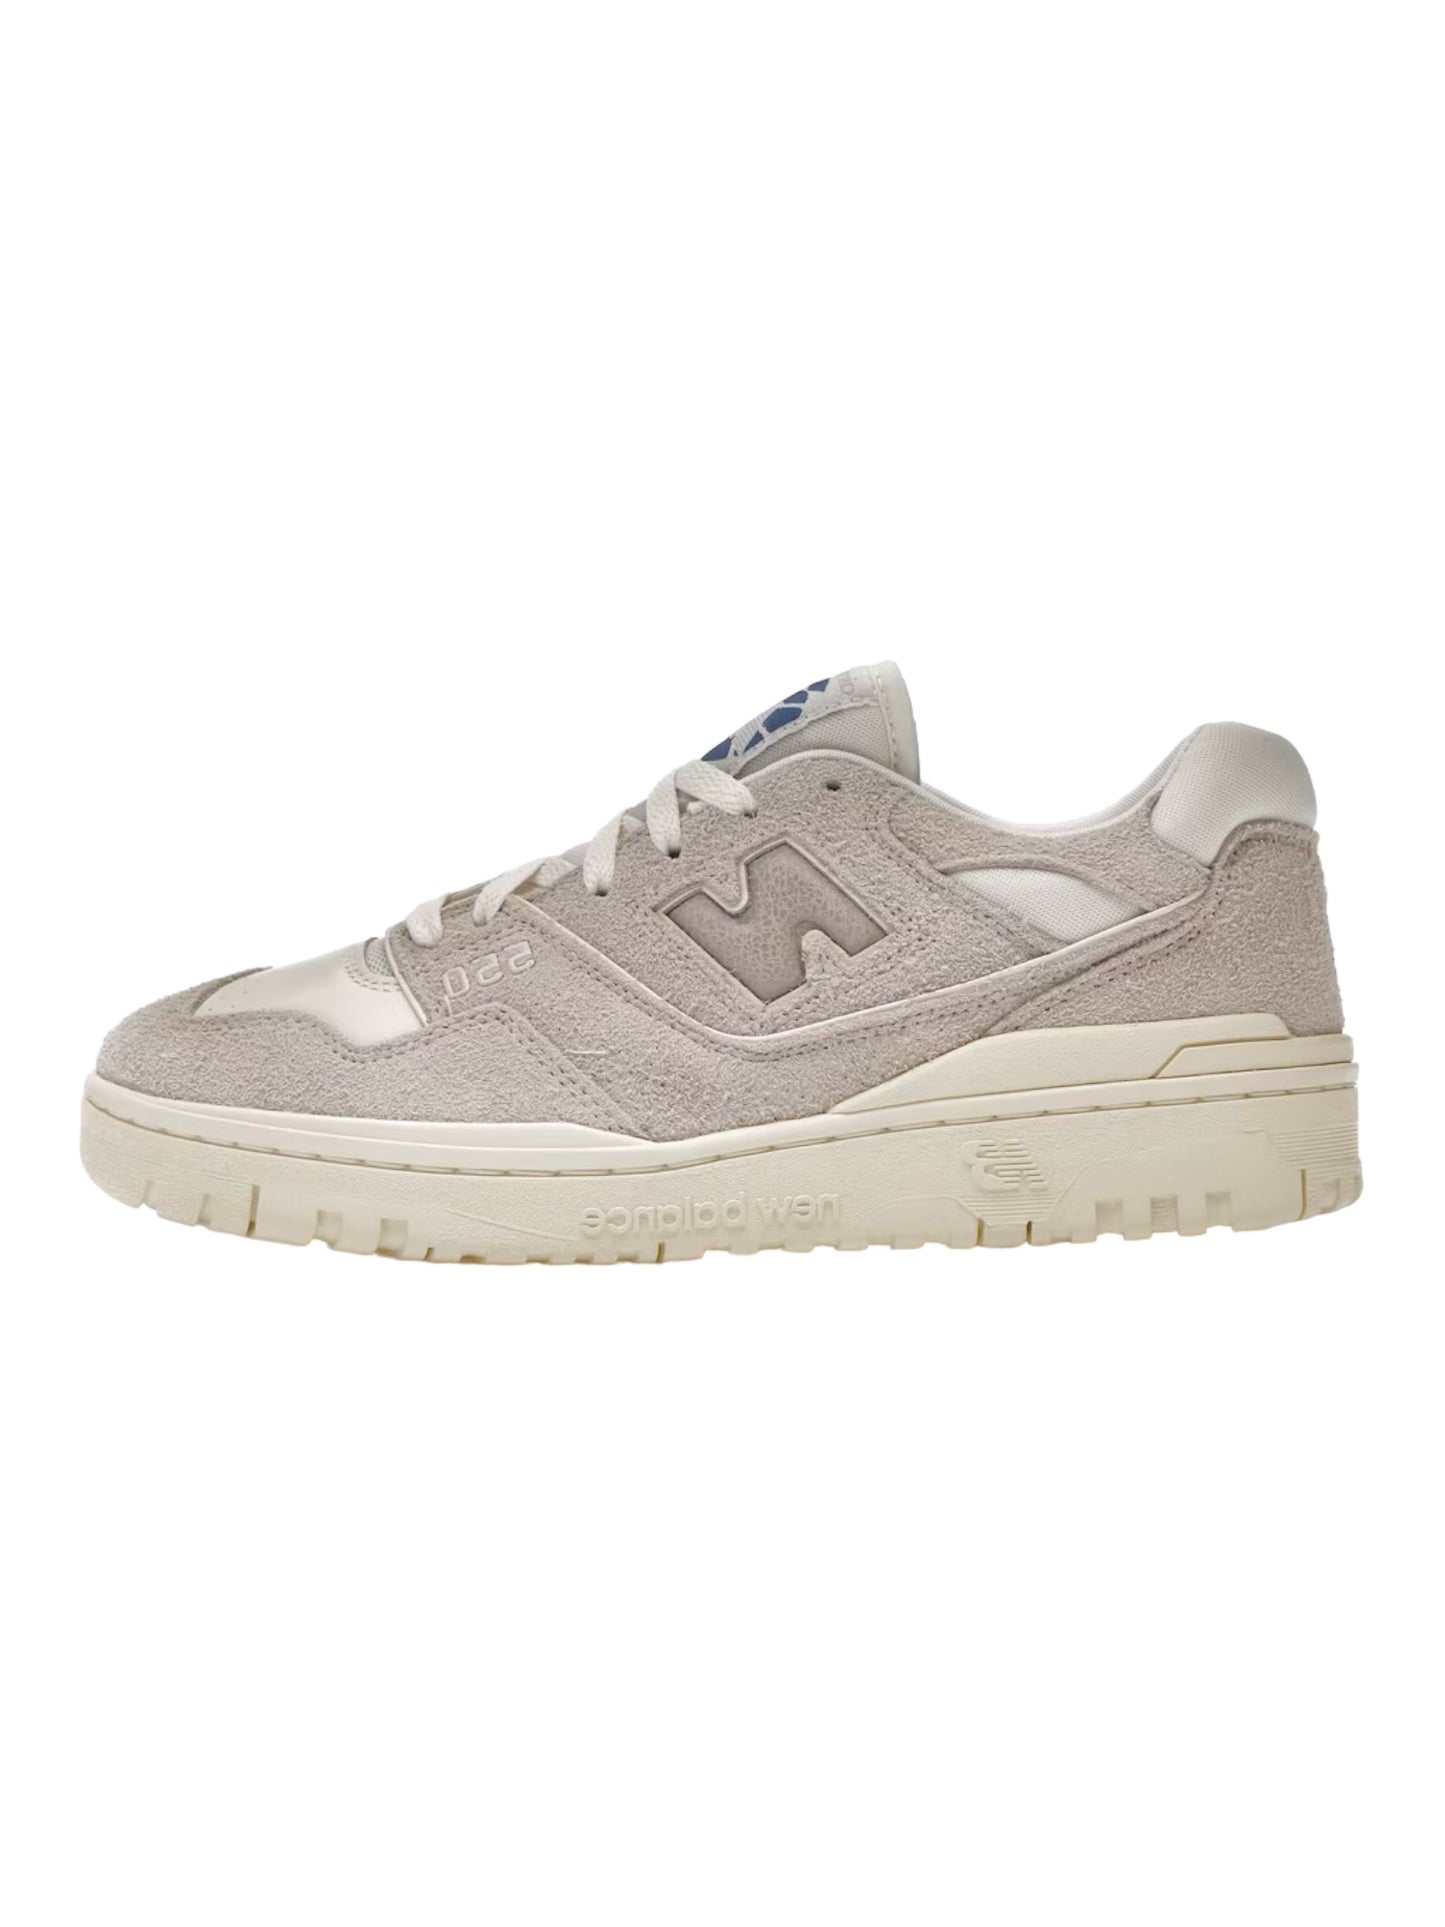 New Balance 550 Aime Leon Dore Grey Suede Sneakers